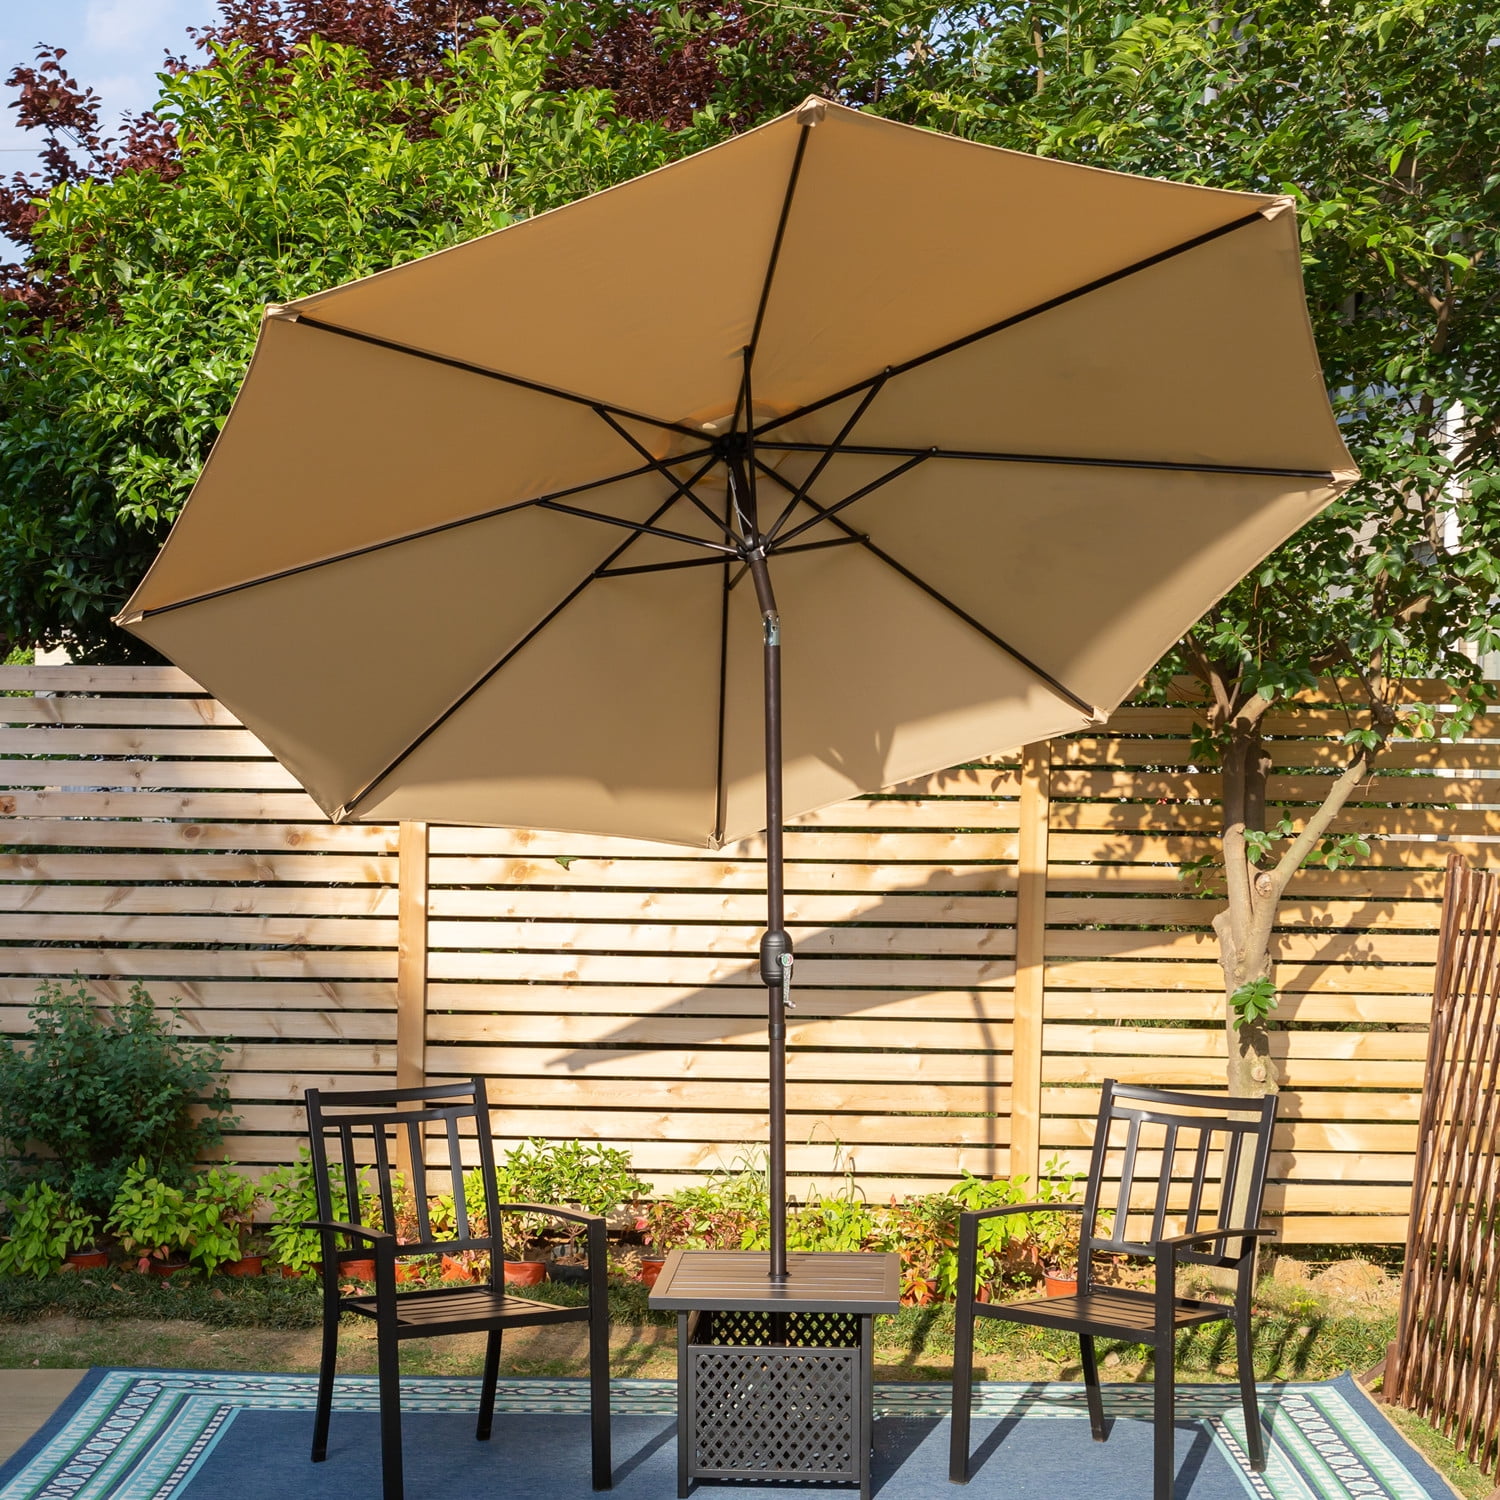 MF STUDIO 10 ft Patio Umbrella with 16 Ribs Sturdy Enough for Windproof Rainproof,Outdoor Market Umbrella with Button Tilt and Crank,Beige 